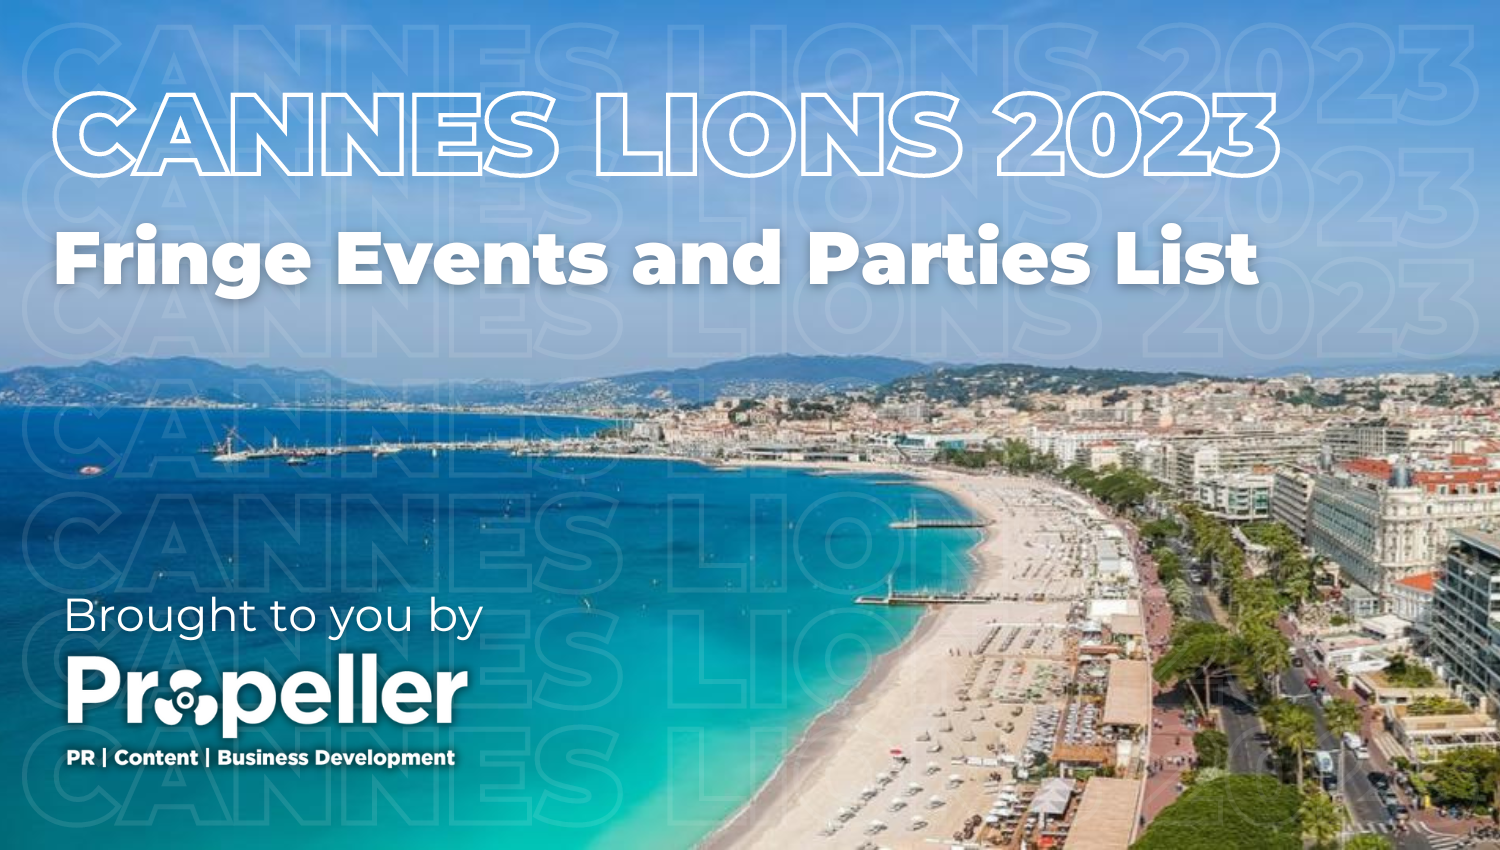 Fight ‘FOMO’ at Cannes Lions 2023